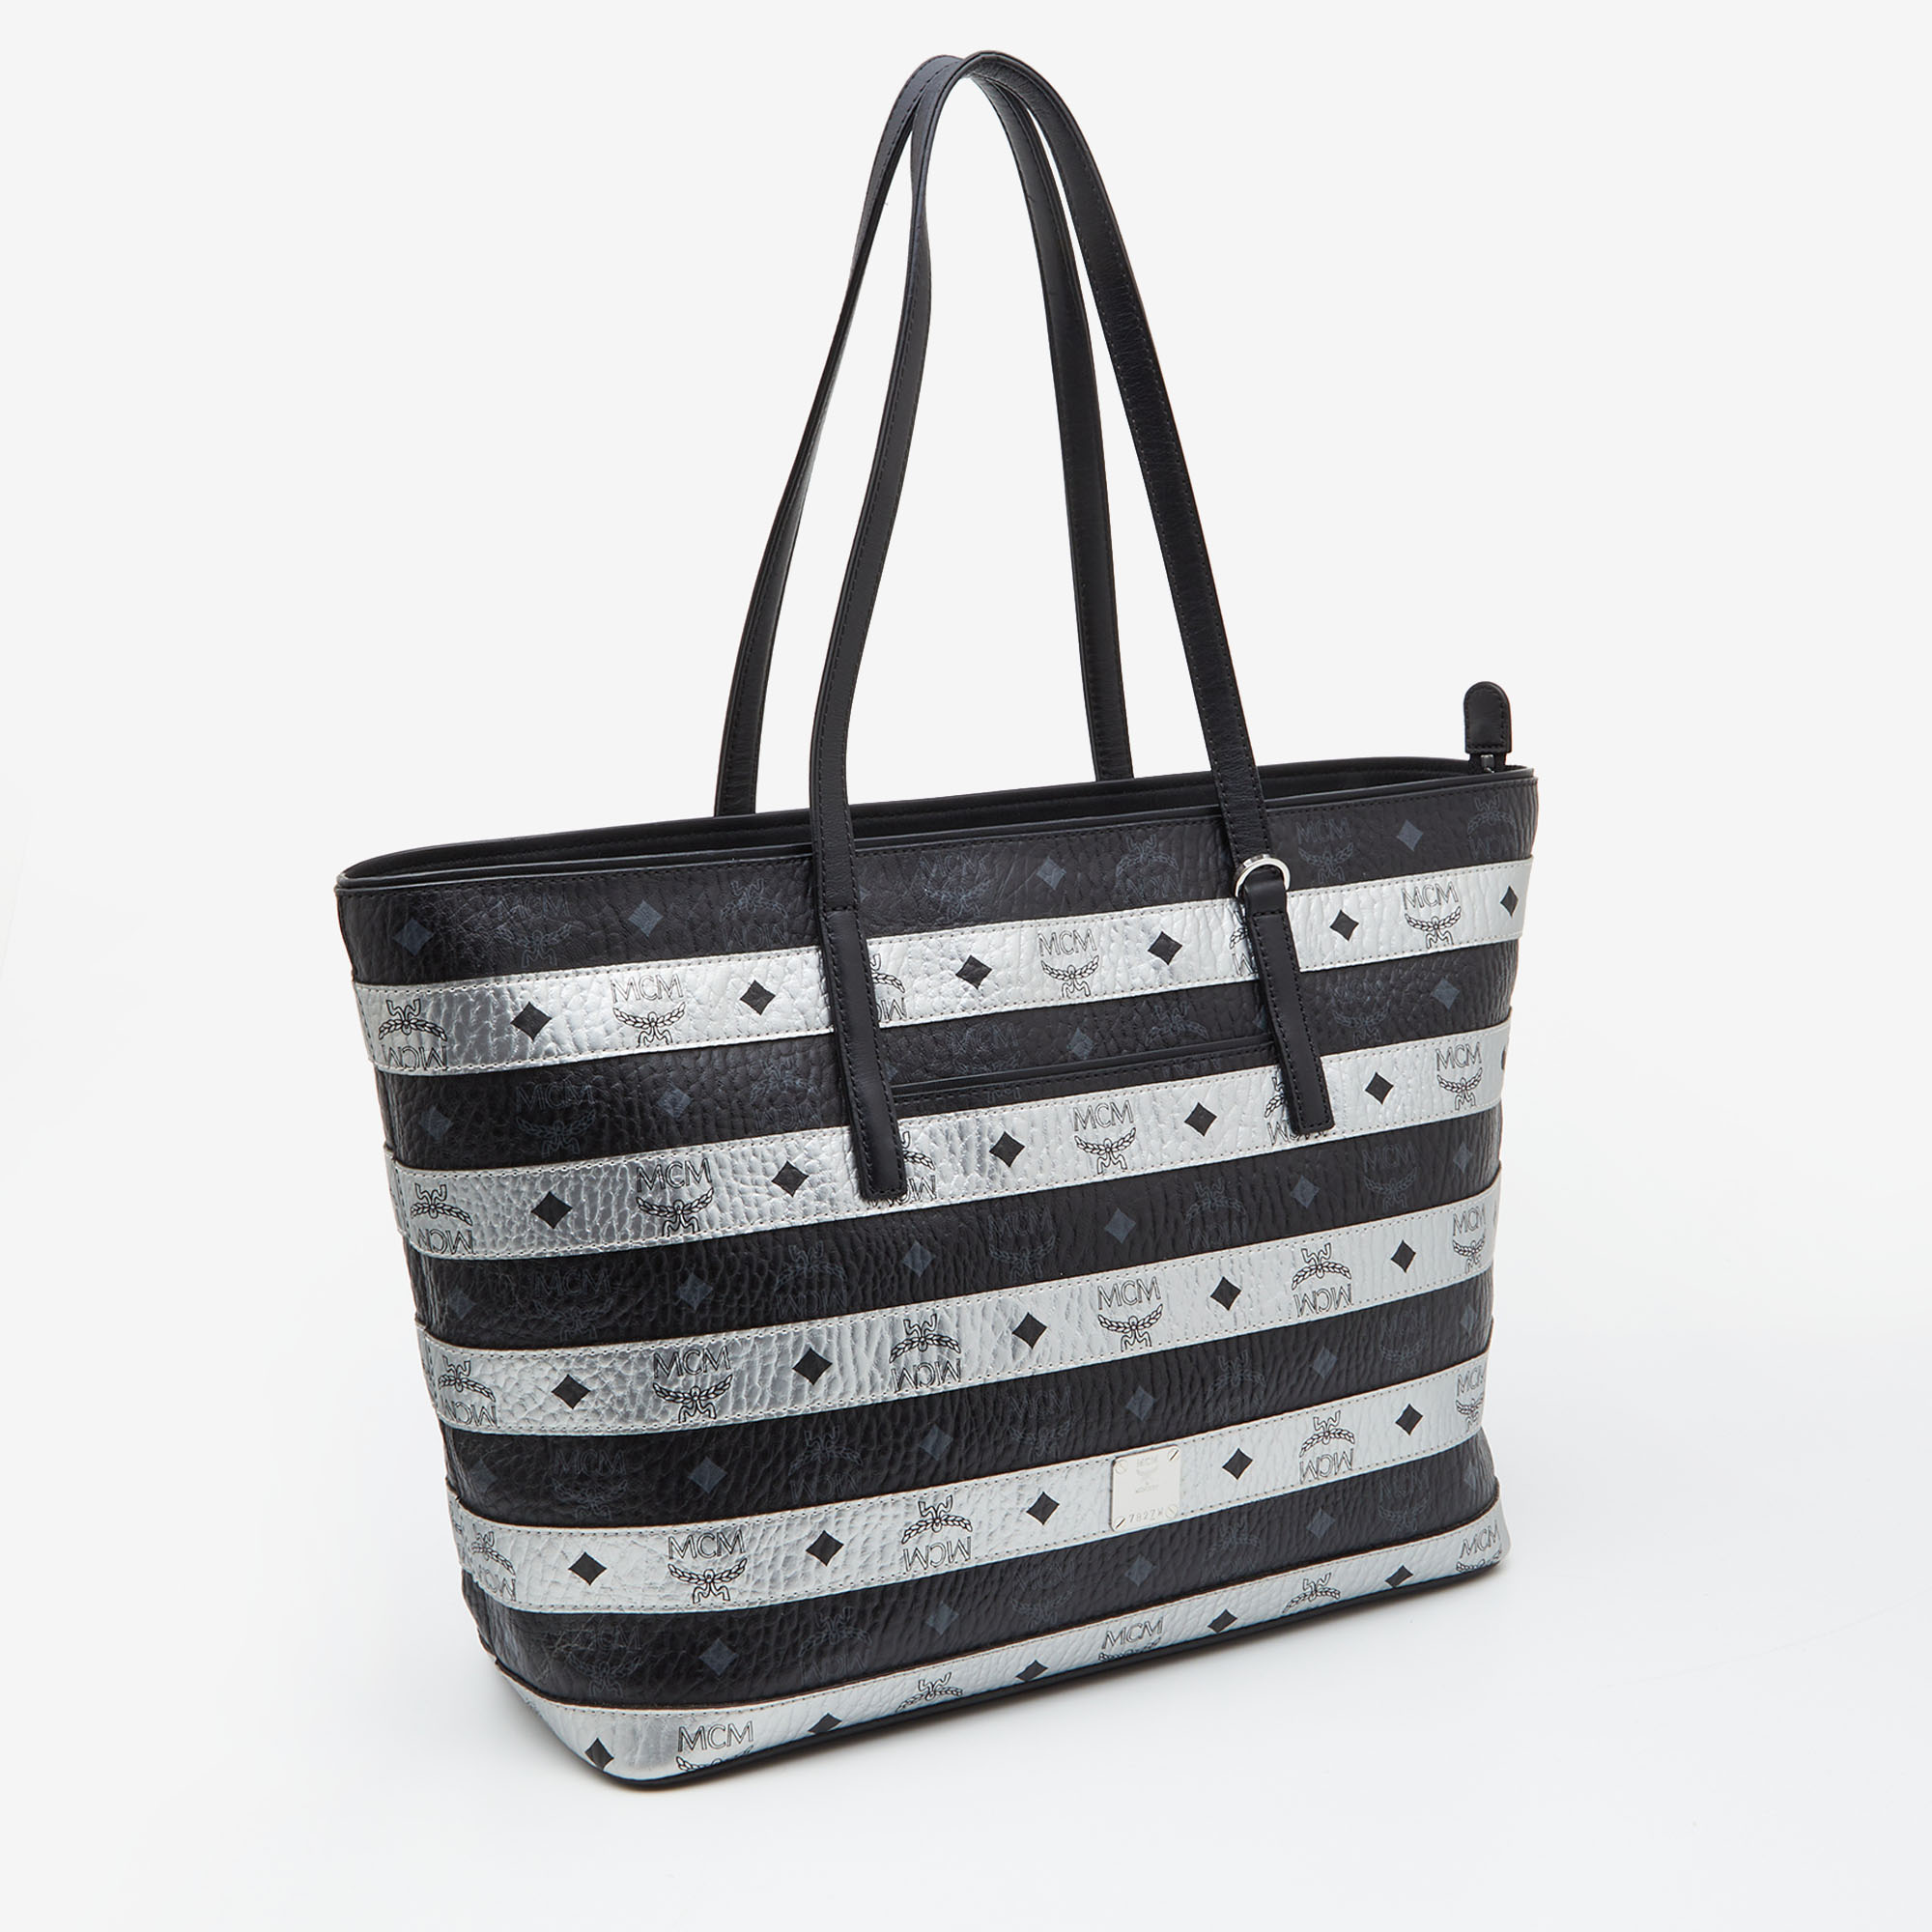 MCM Black/Silver Visetos Coated Canvas And Leather Shopper Tote